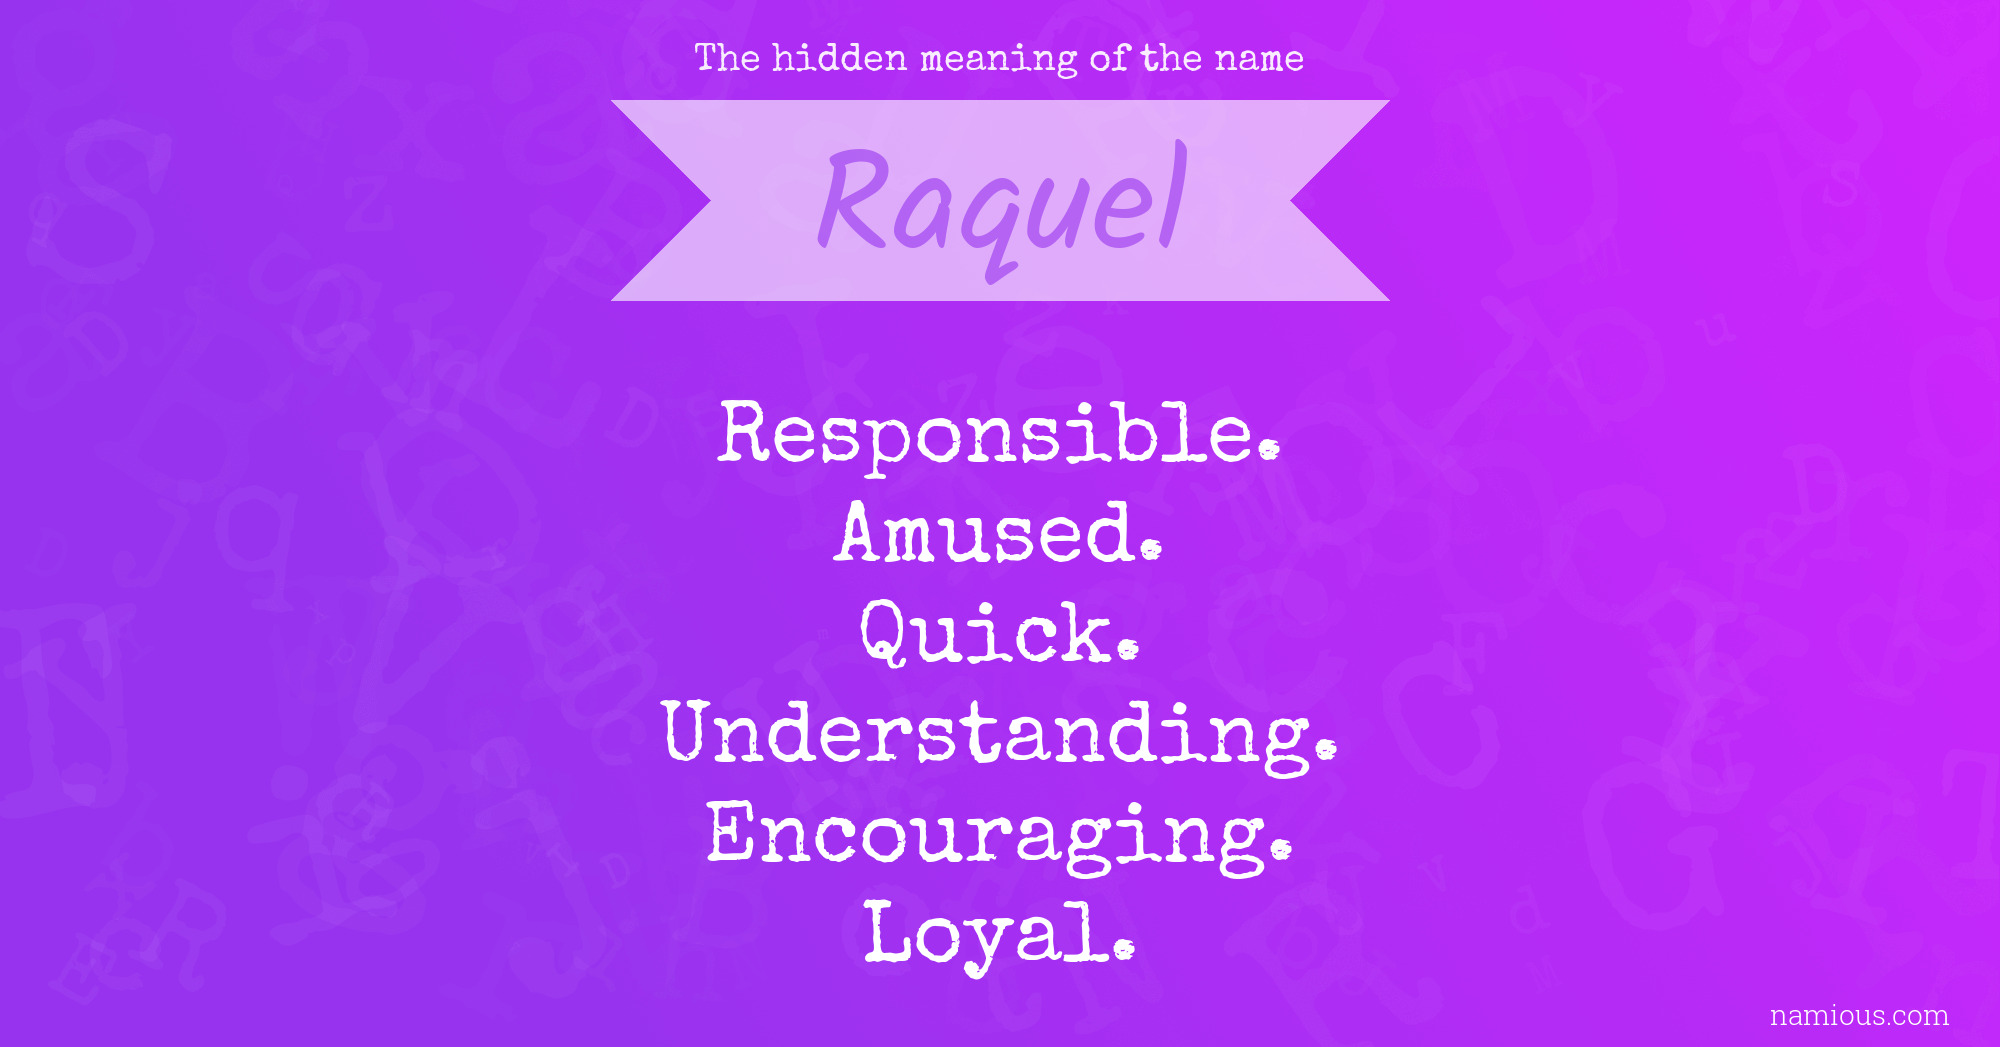 The hidden meaning of the name Raquel